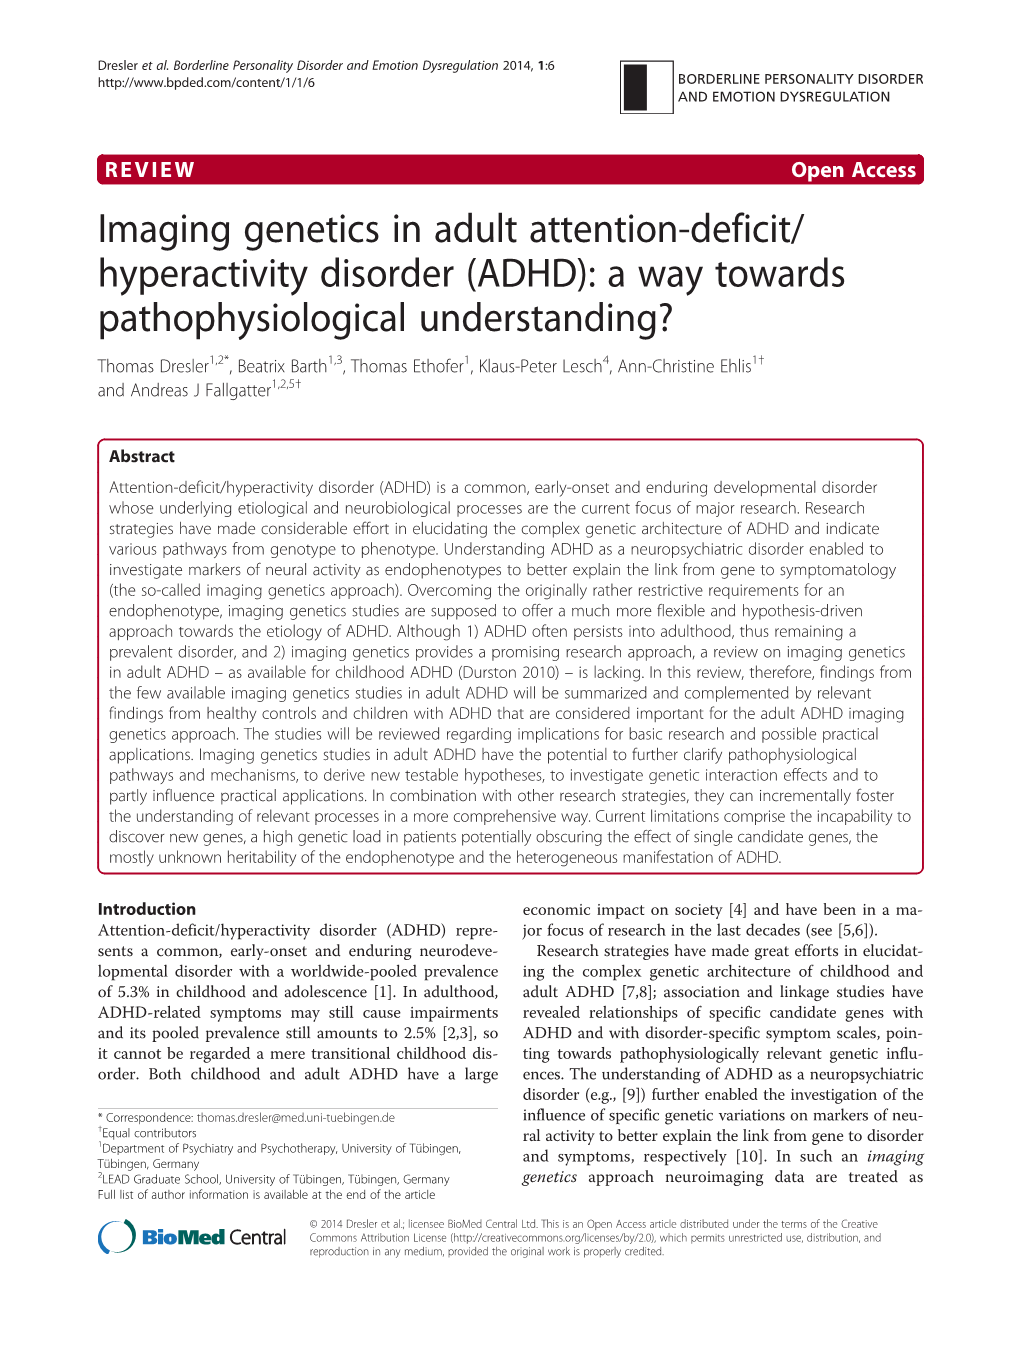 Imaging Genetics in Adult Attention-Deficit/ Hyperactivity Disorder